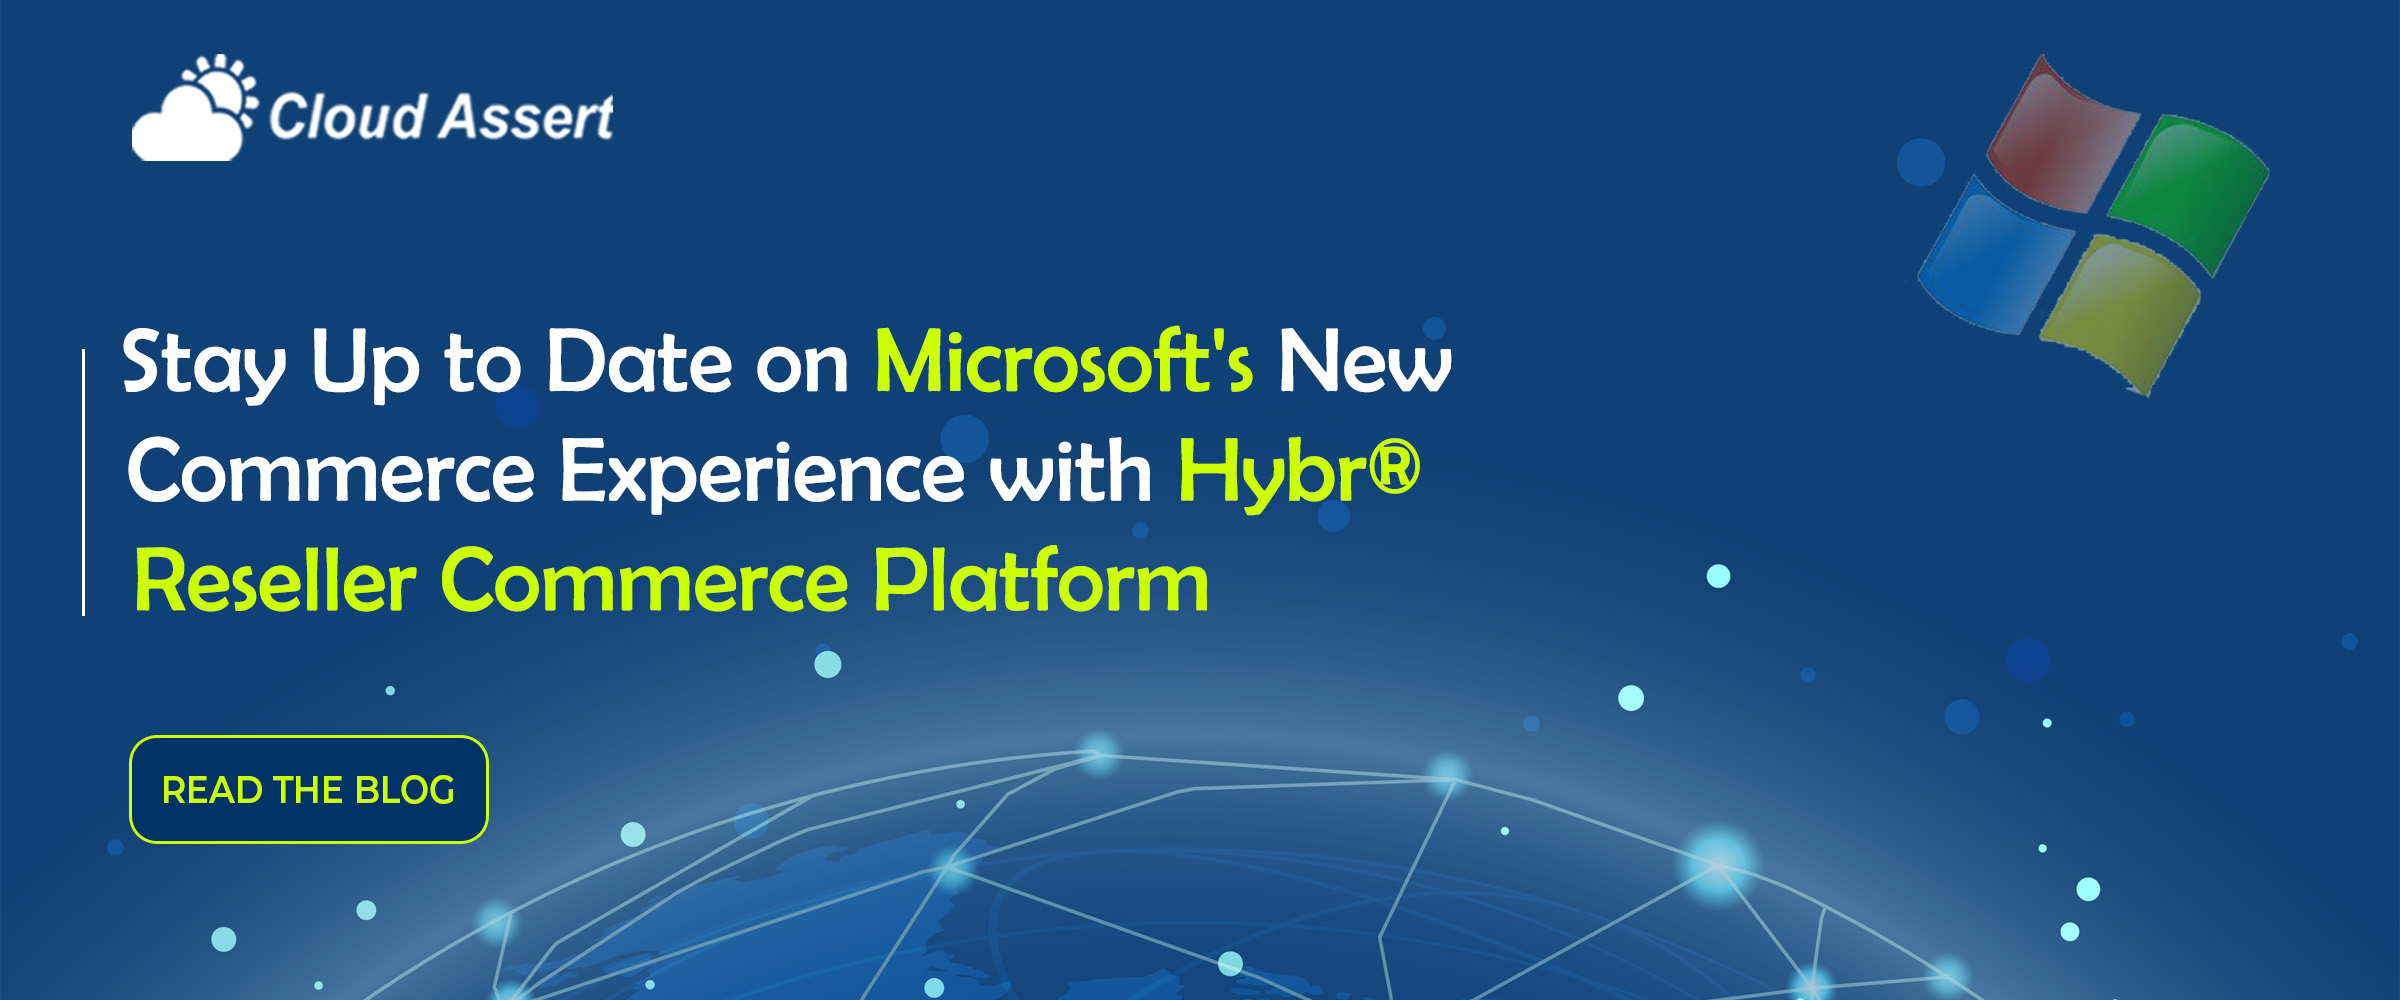 Microsoft's New Commerce Experience with Hybr® Reseller Commerce Platform